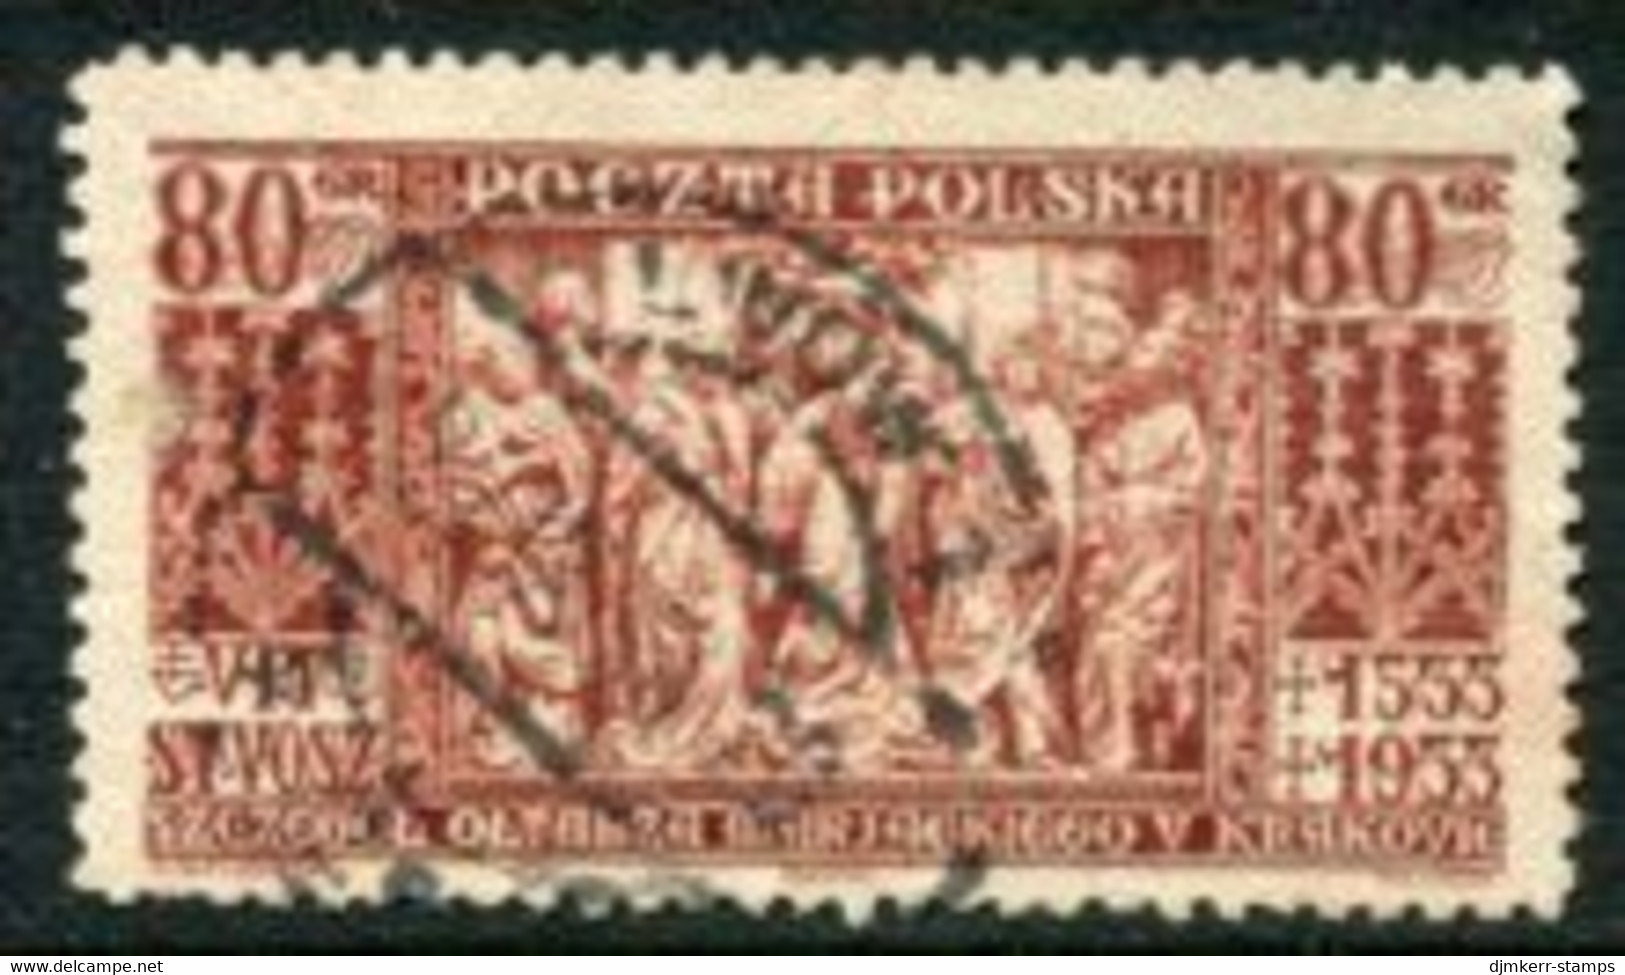 POLAND 1933 Veit Stoss Quatercentenary Used....  Michel 282 - Used Stamps